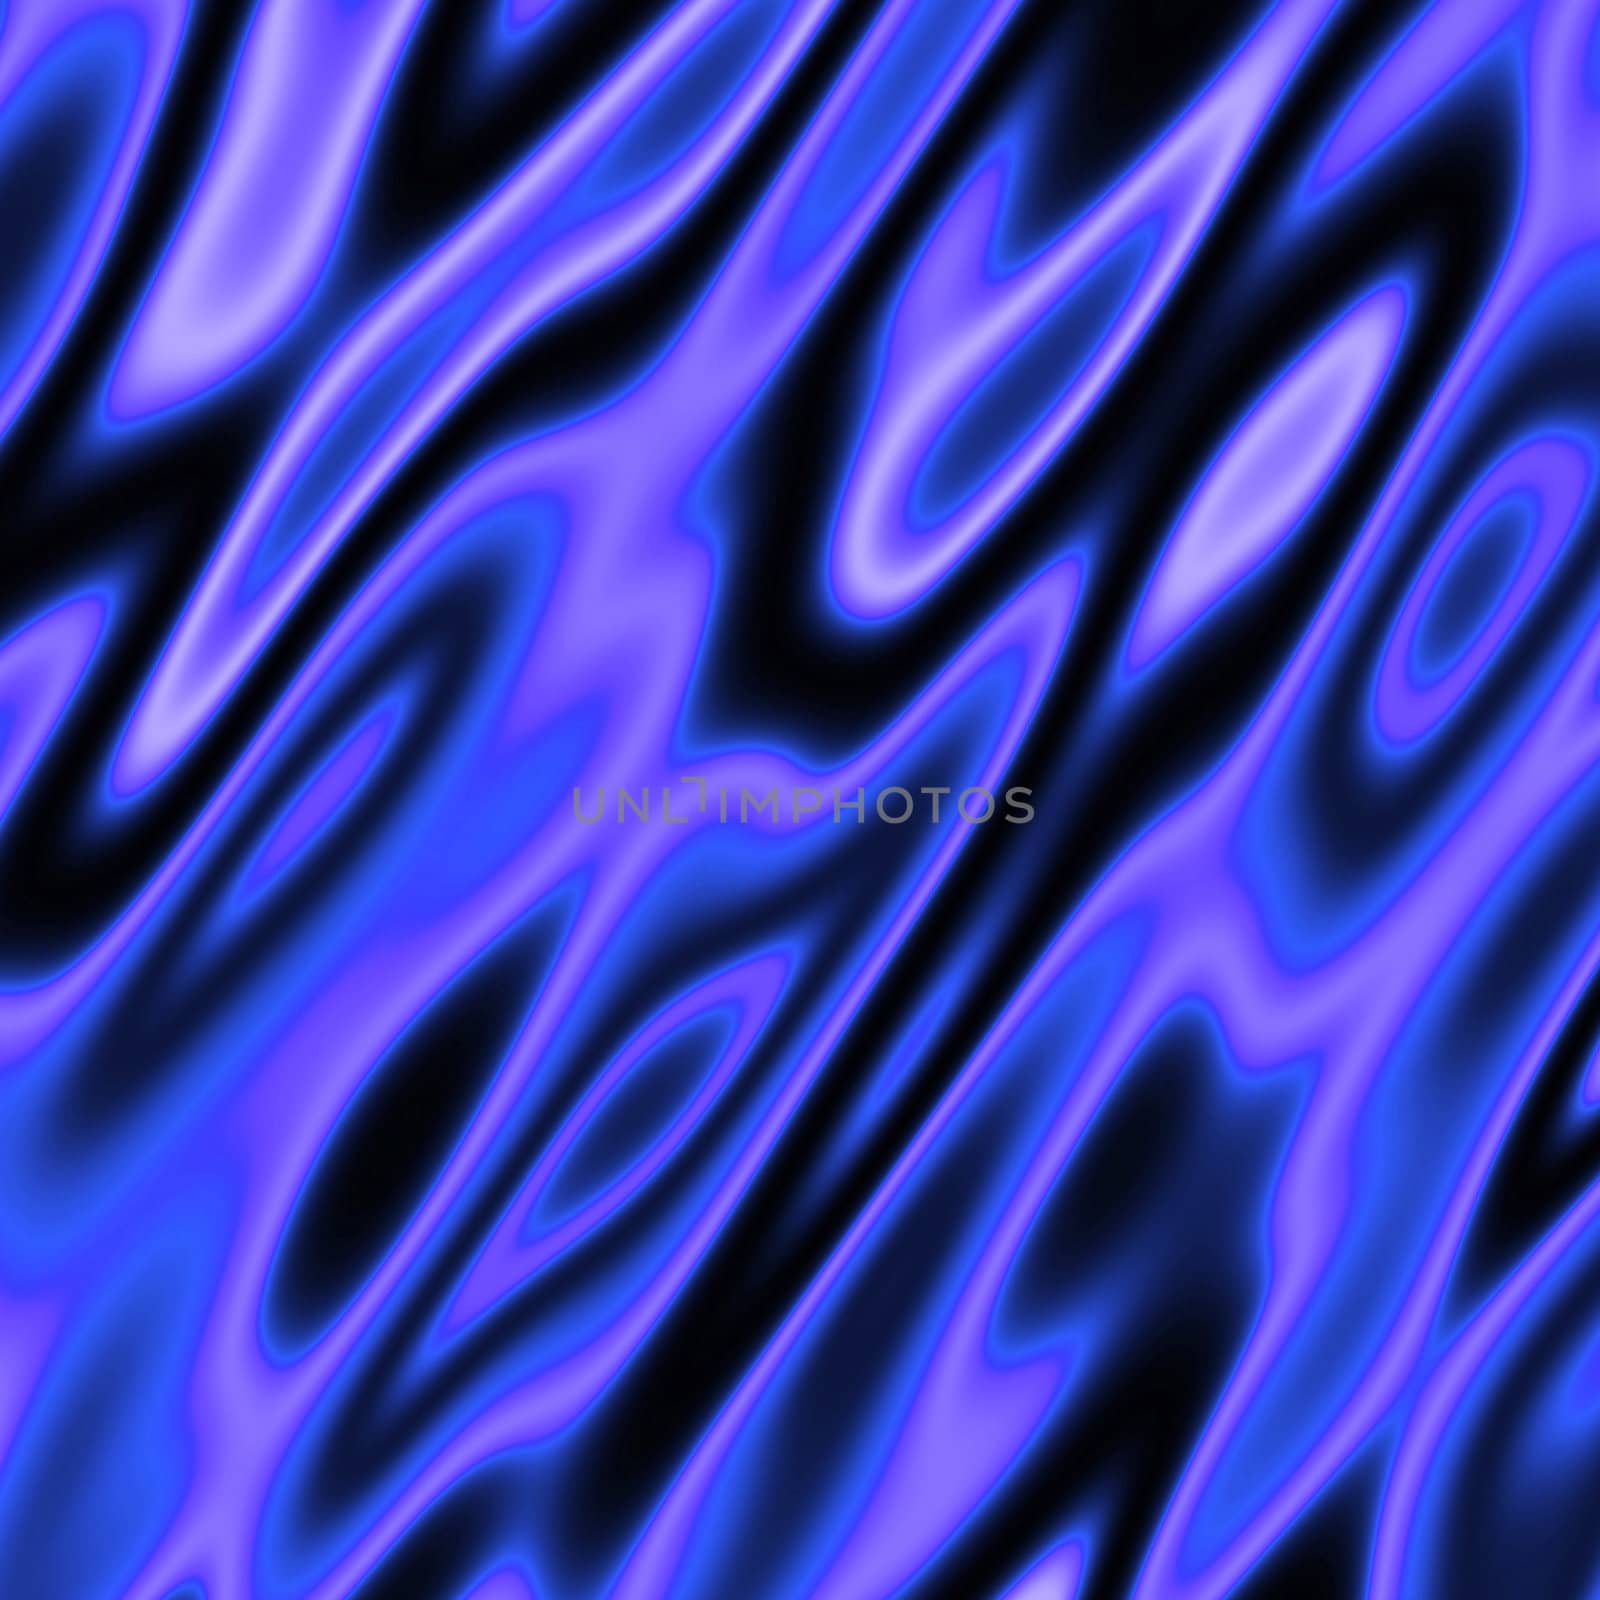 A blue flames background texture - very hot.